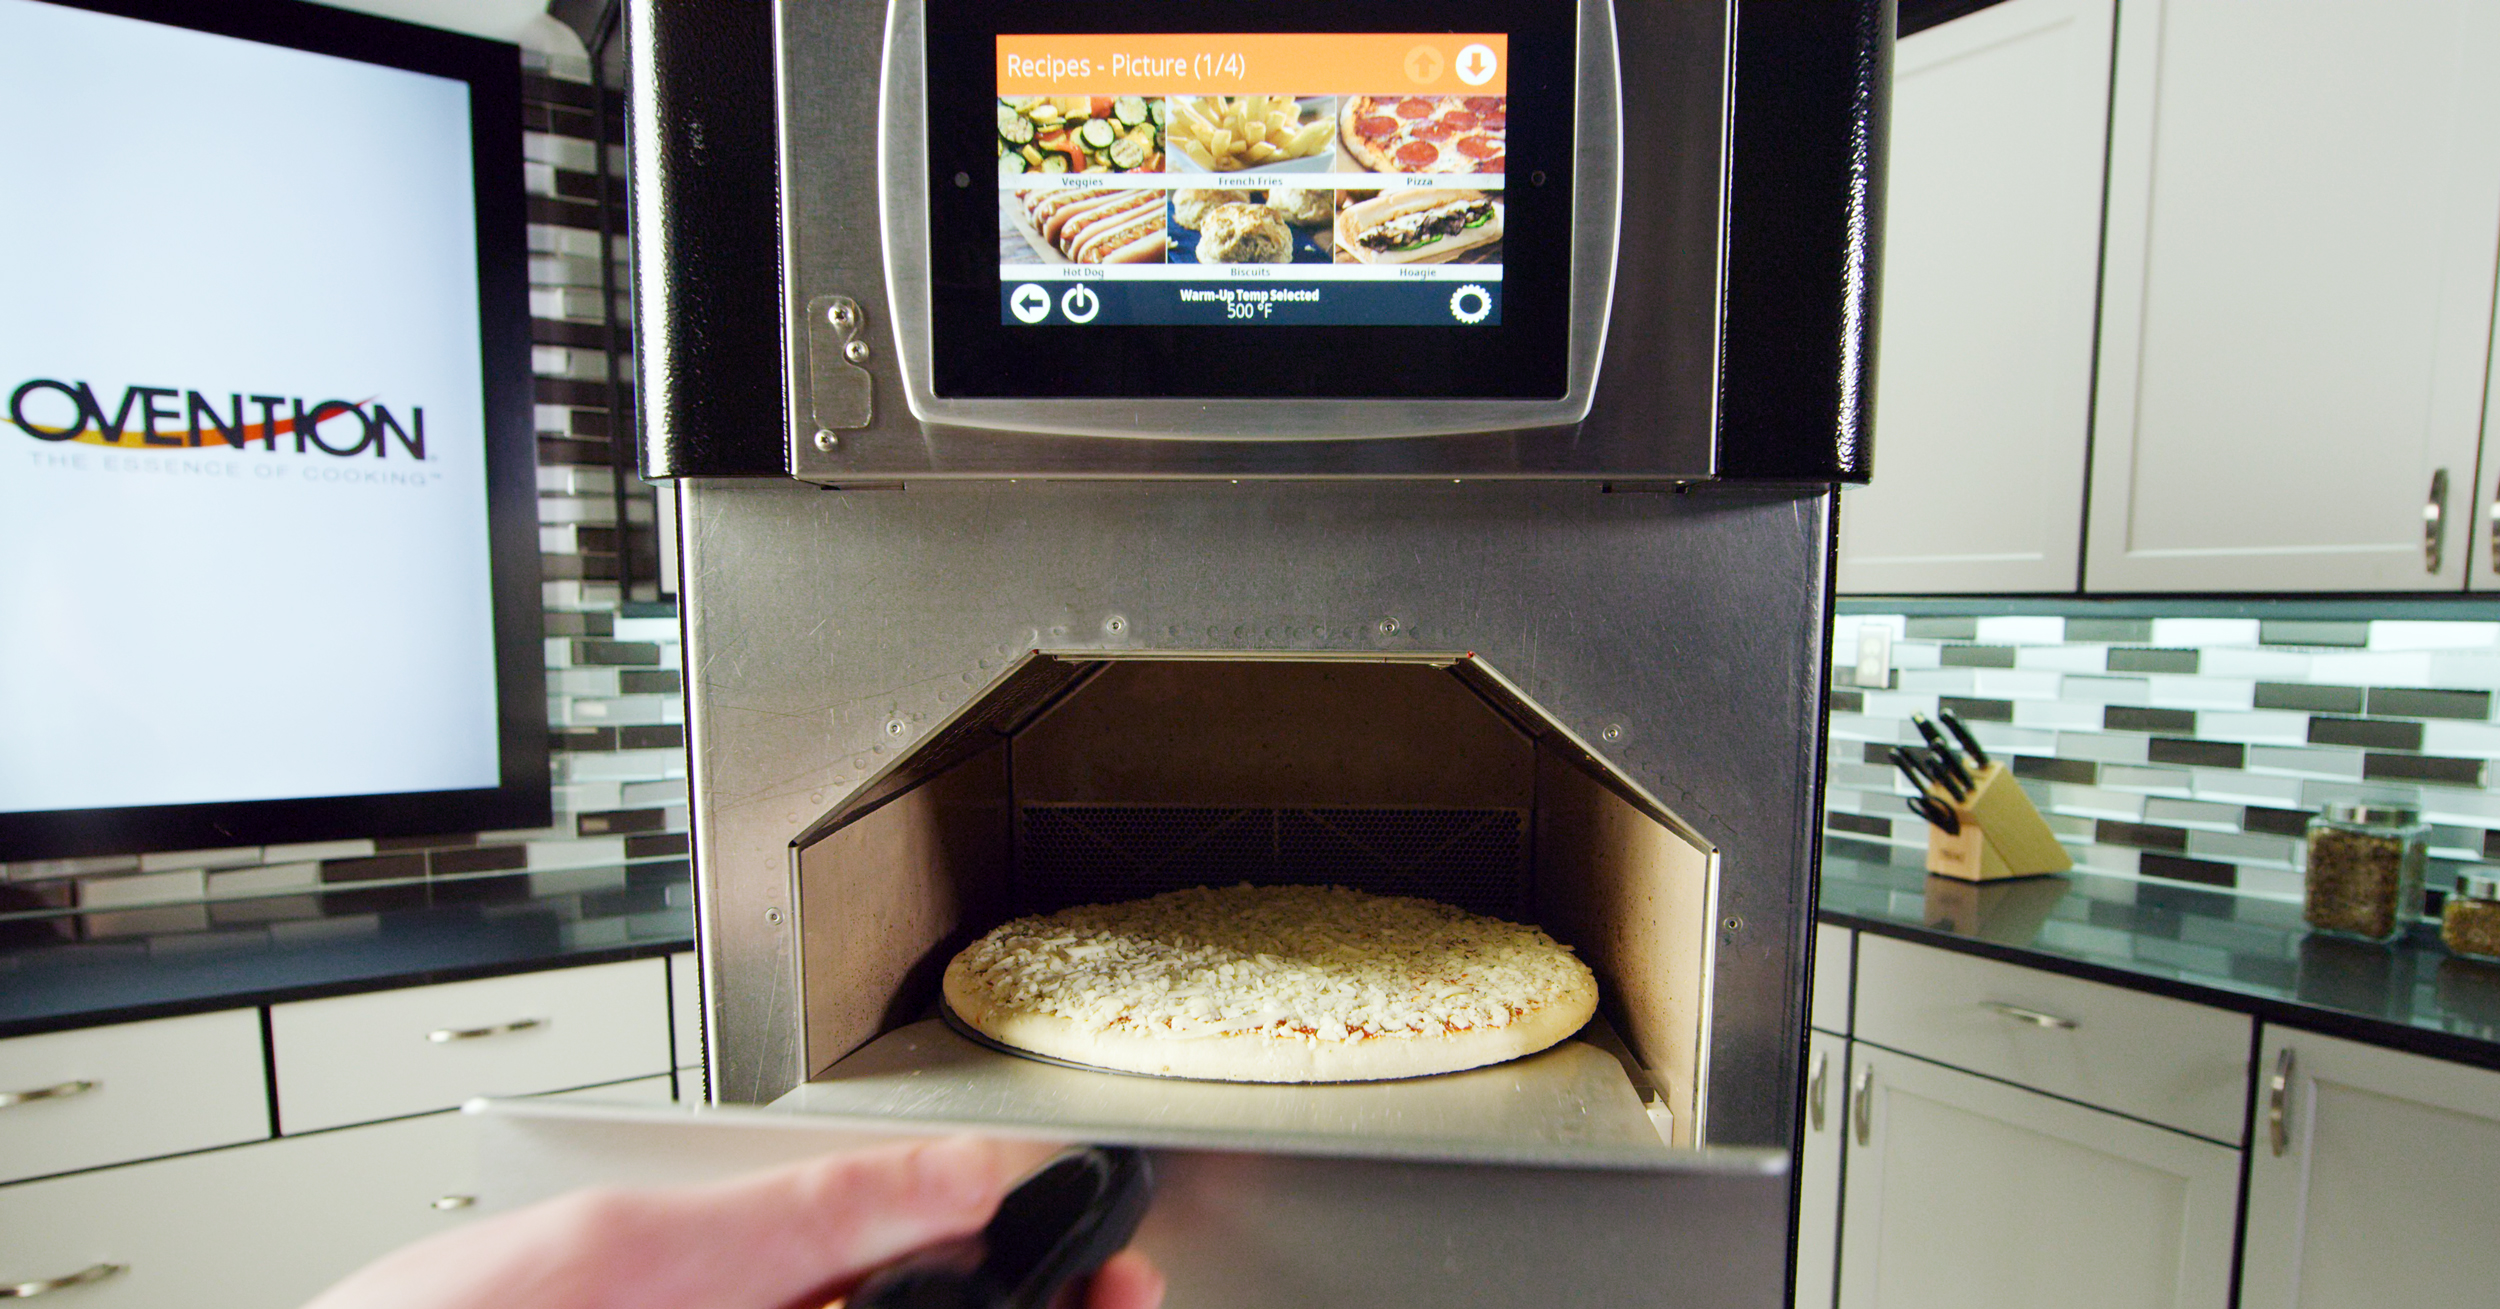 New Oven Tech for Stress-Free Cooking